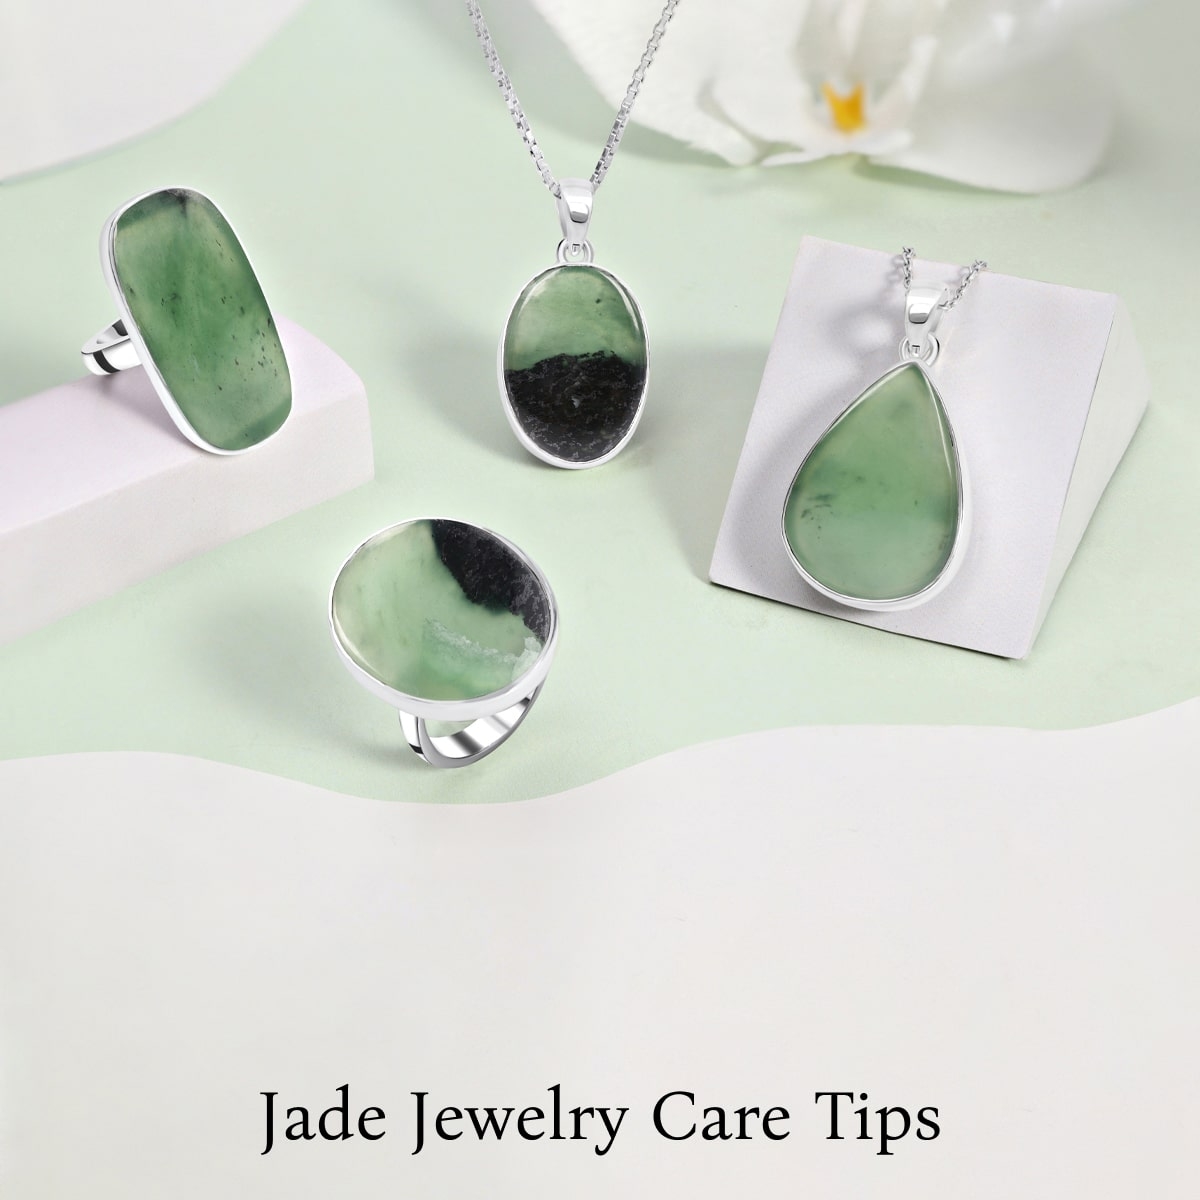 How to Care for Your Jade Jewelry